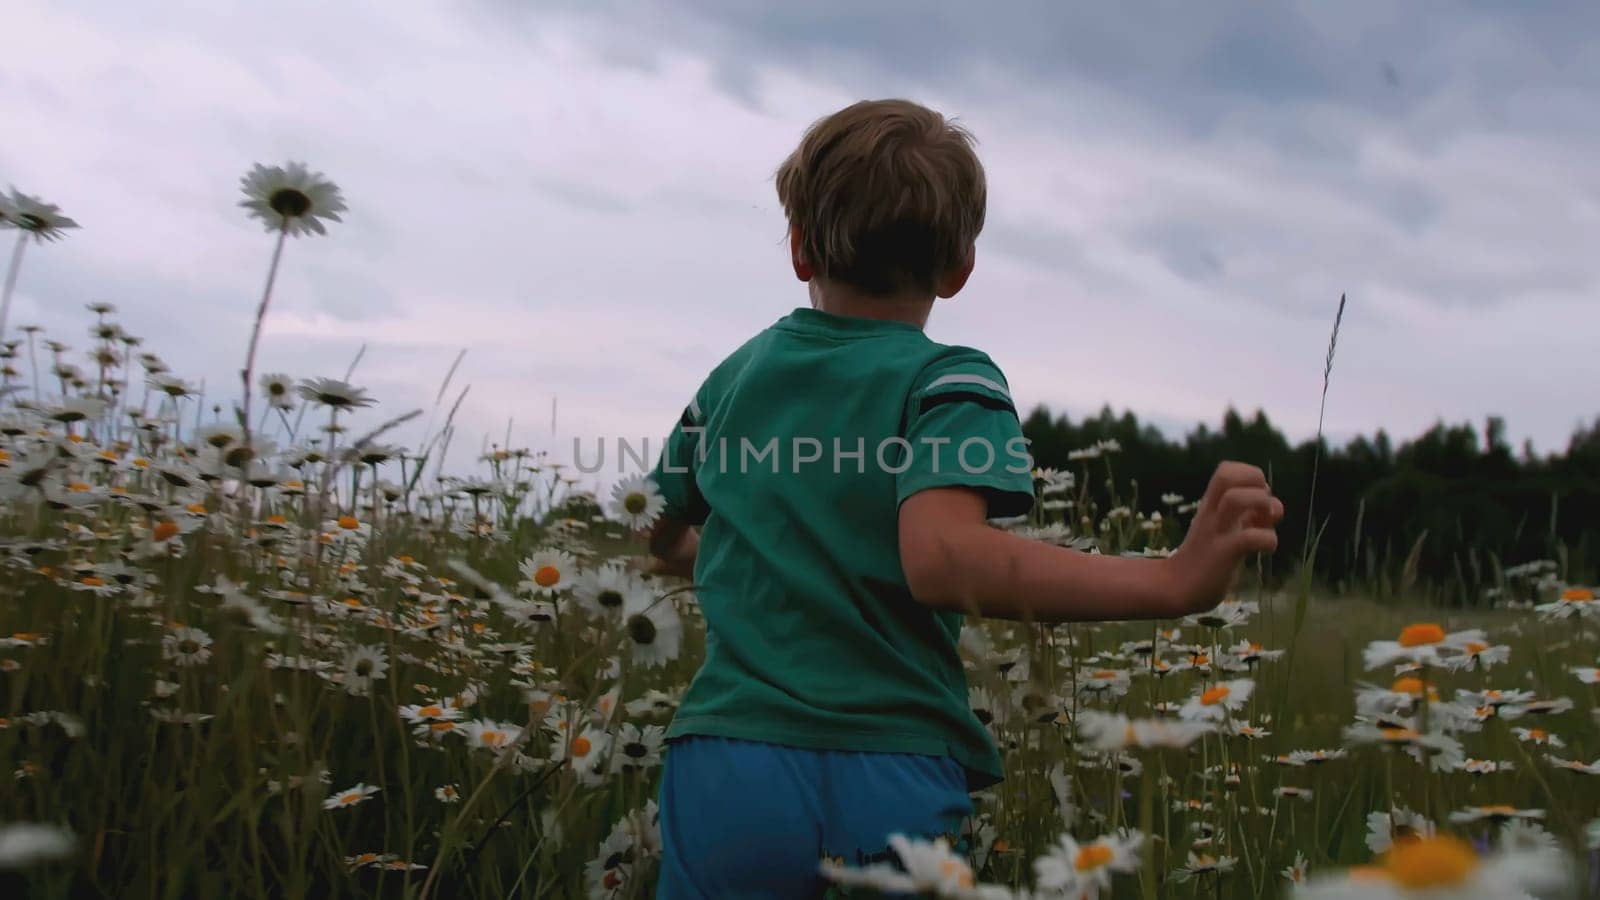 The boy runs through the meadow with flowers. CREATIVE. Rear view of a child running through a field of daisies. A child in blue clothes runs through the tall grass with daisies.